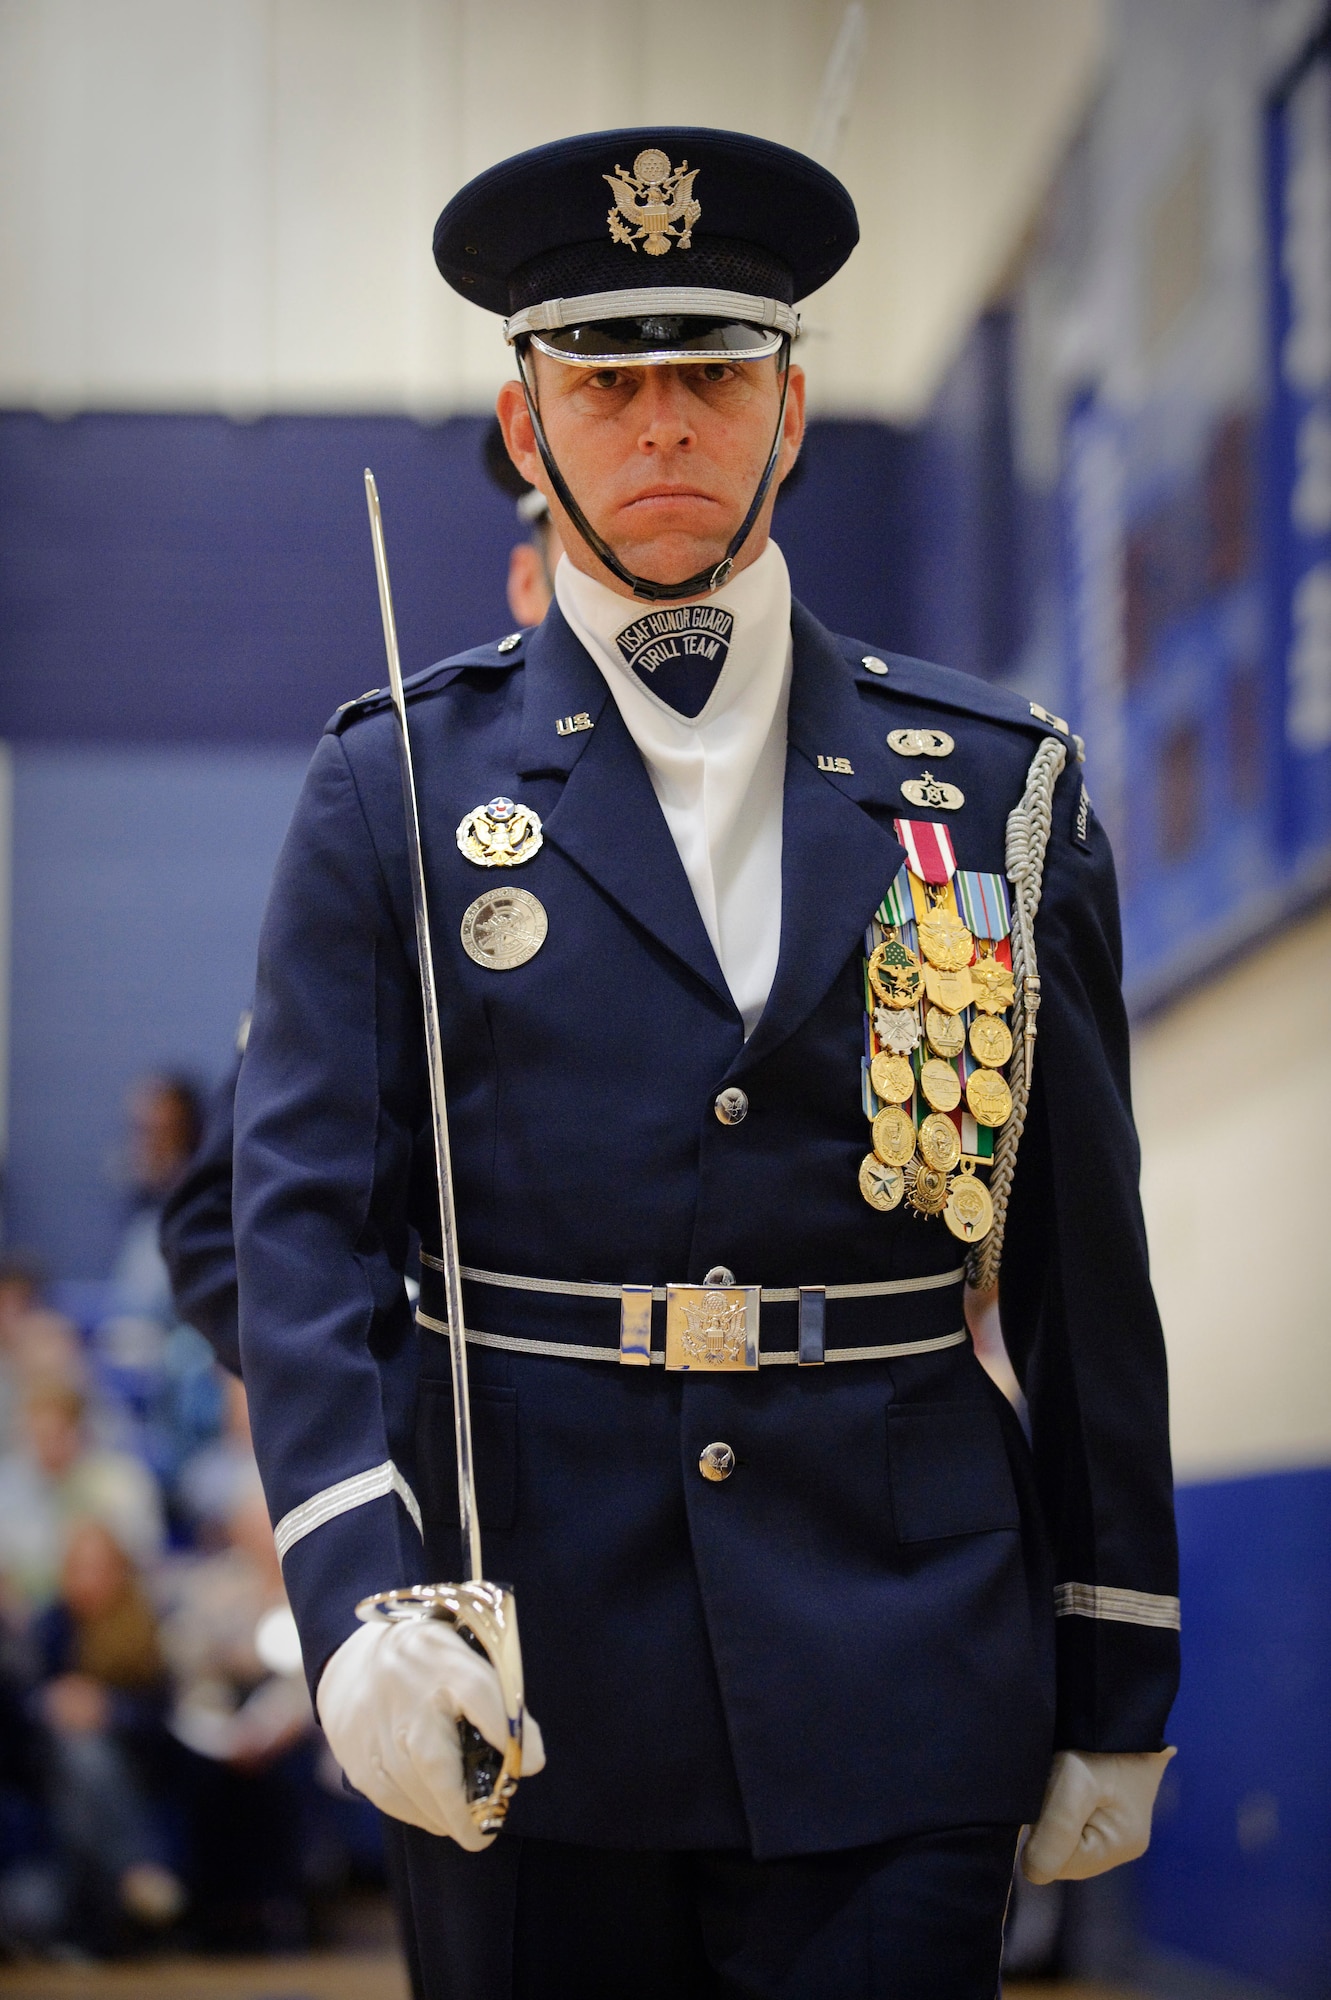 Capt. Michael Fanton, U.S. Air Force Honor Guard Drill Team commander marches into the Randolph High School gymnasium during an assembly on Nov. 2. (U.S. Air Force photo/Steve Thurow)